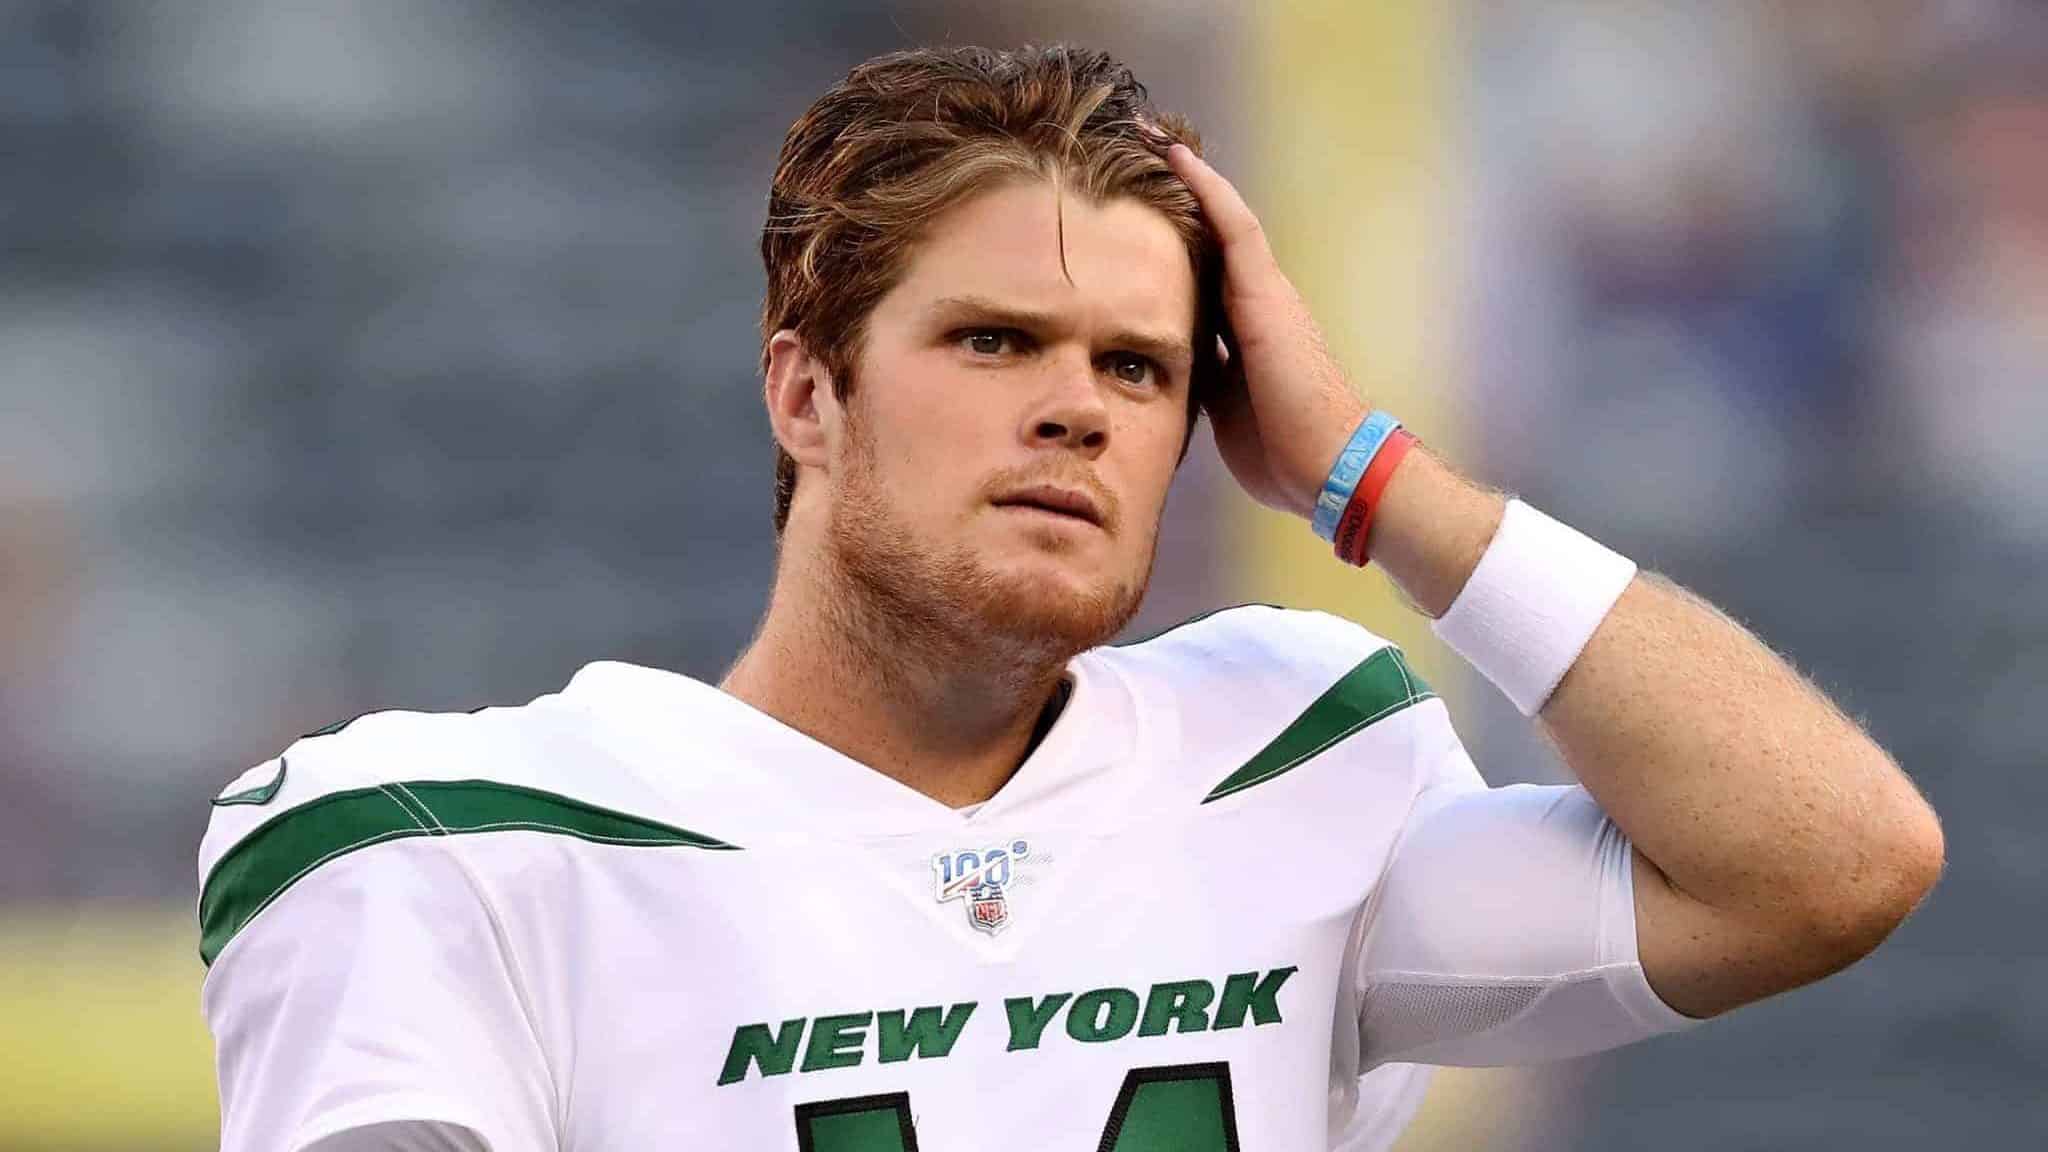 EAST RUTHERFORD, NEW JERSEY - AUGUST 08: Sam Darnold #14 of the New York Jets warms up before the game against the New York Giants during a preseason matchup at MetLife Stadium on August 08, 2019 in East Rutherford, New Jersey.